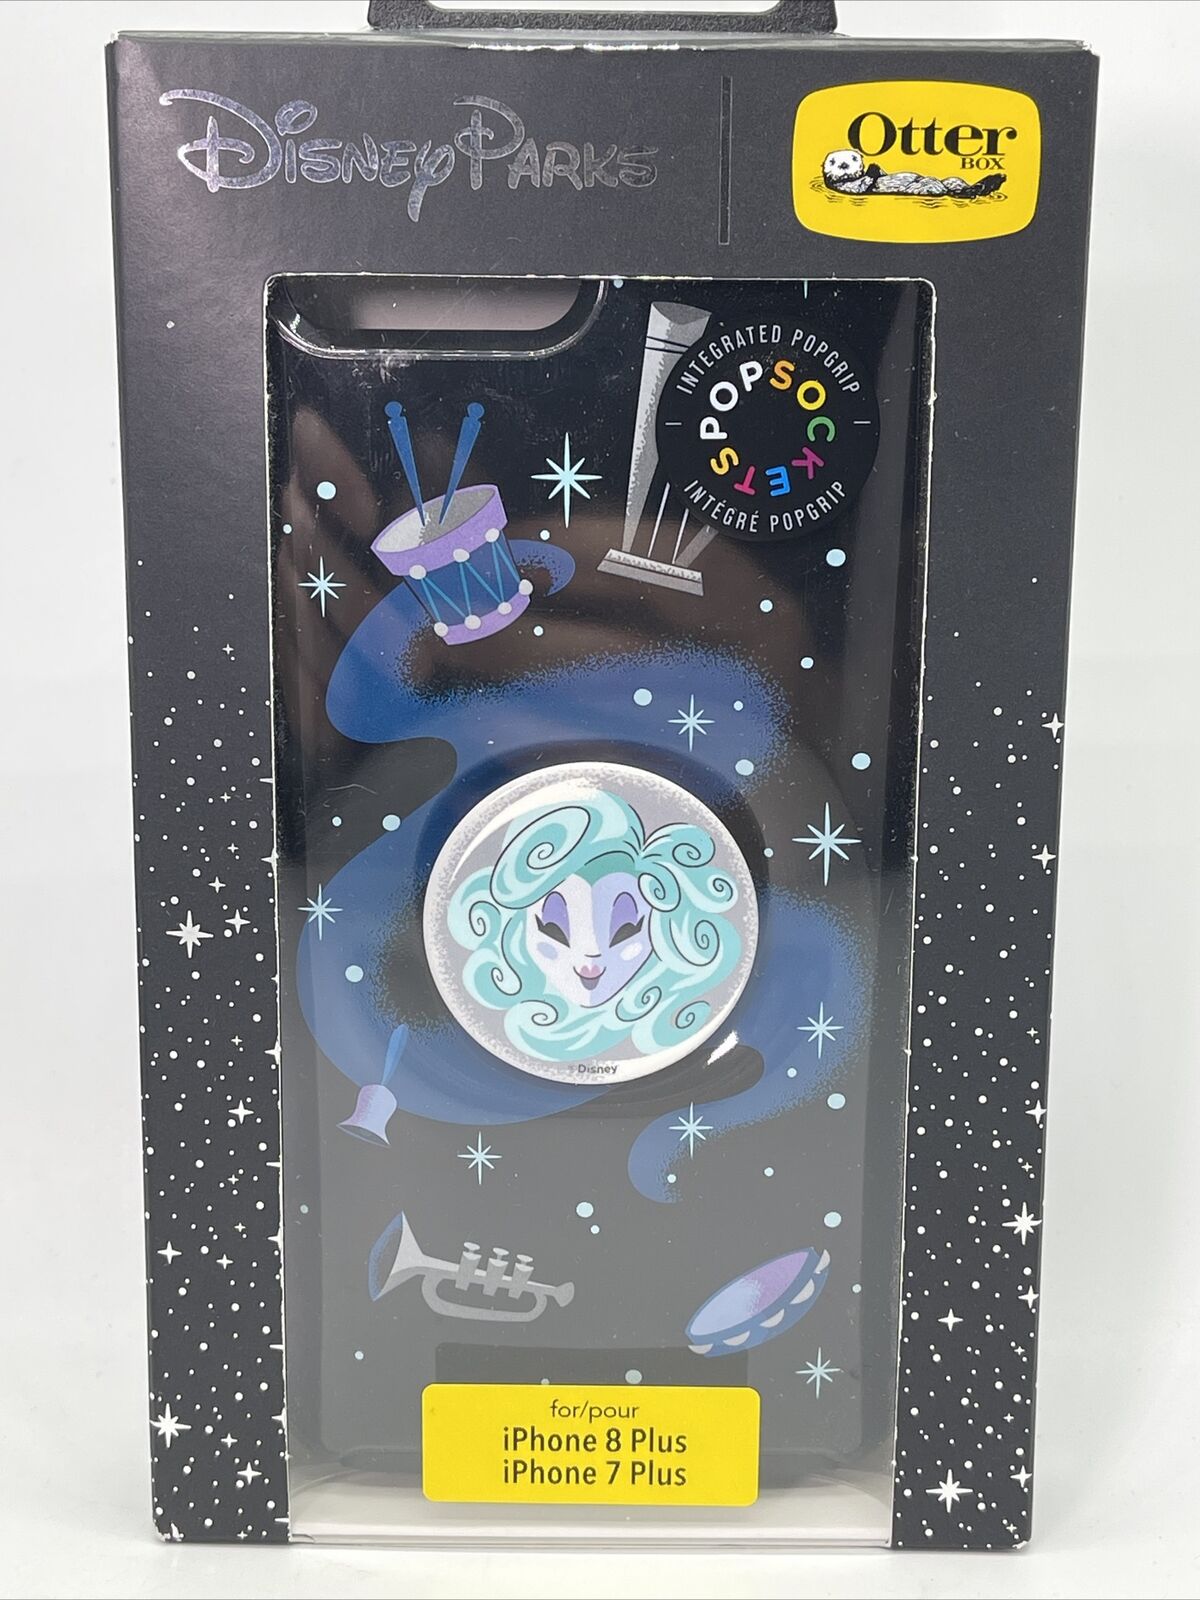 new otterbox disney parks rare soldout haunted mansion popsocket iPhone 7/8 Plus